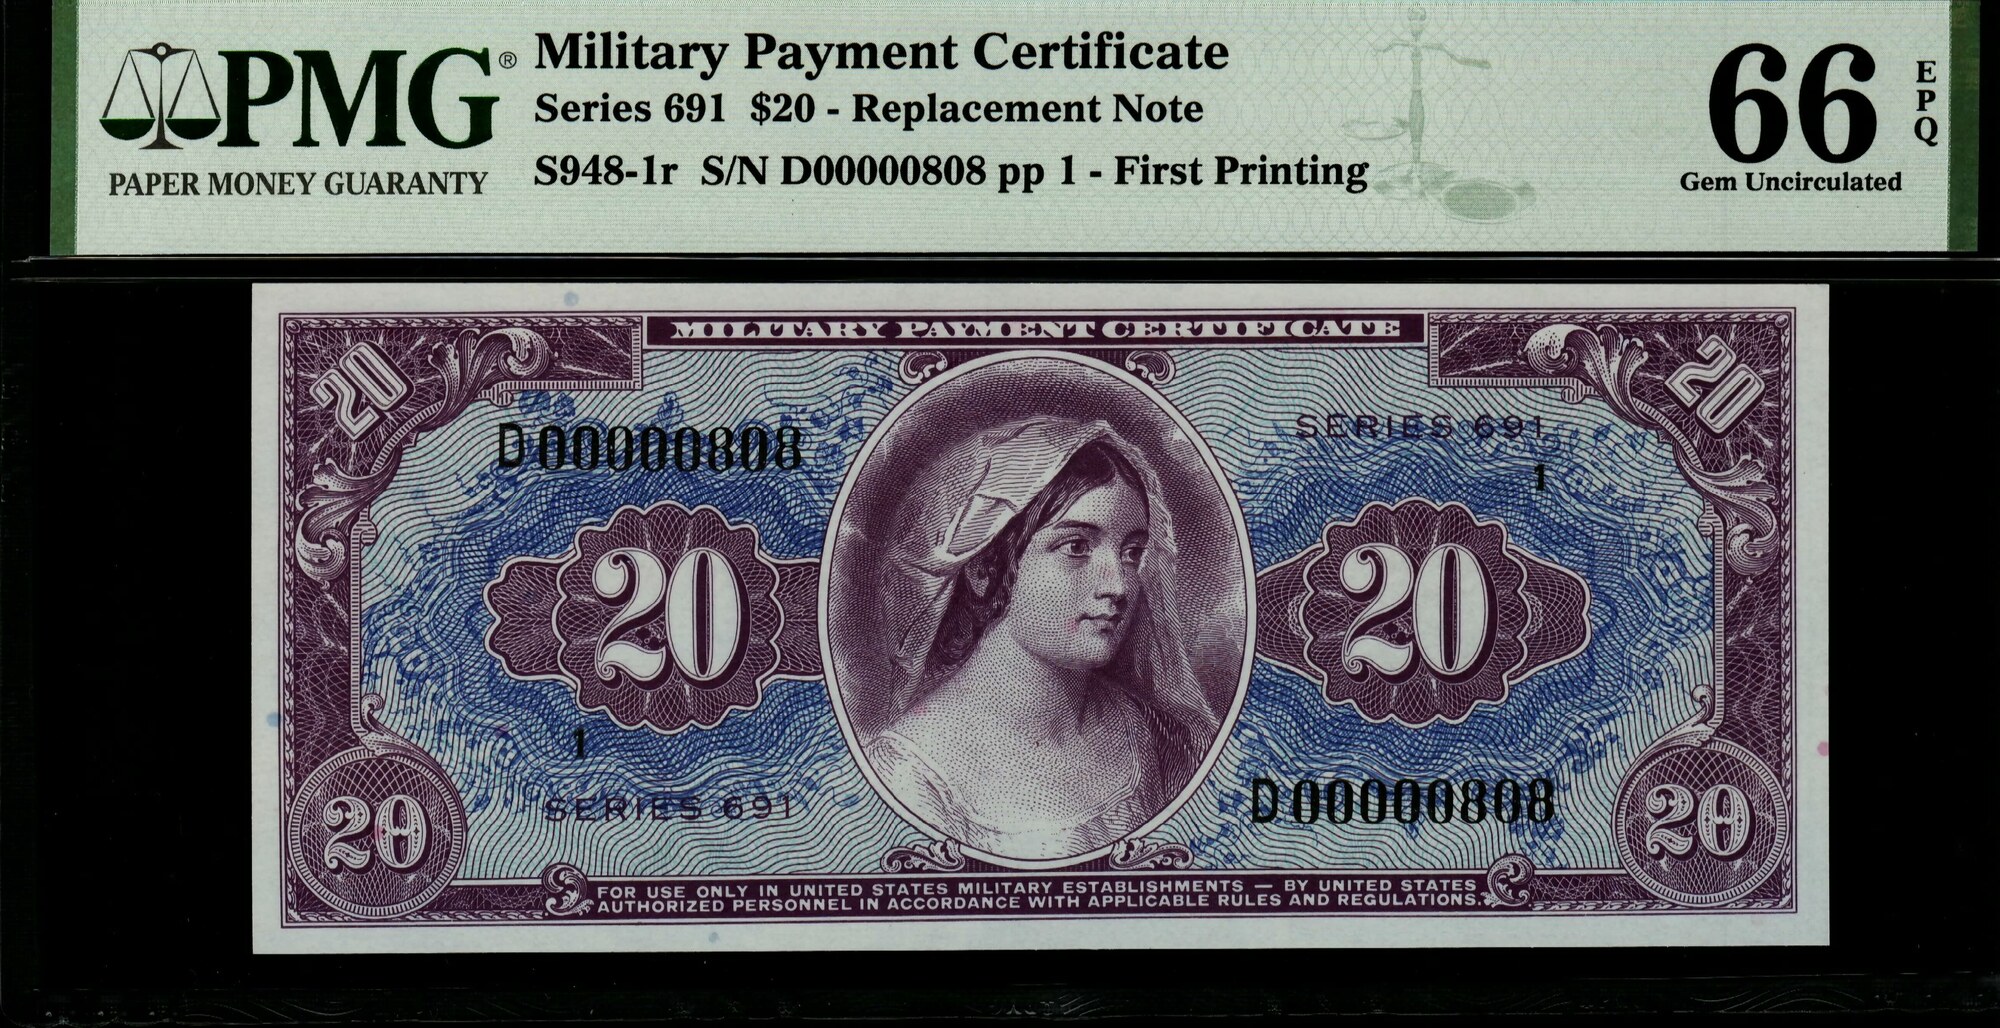 UNITED STATES USA 20 DOLLARS 1969 P M90 PMG 66 MILITARY PAYMENT MPC 691 UNC NOTE 